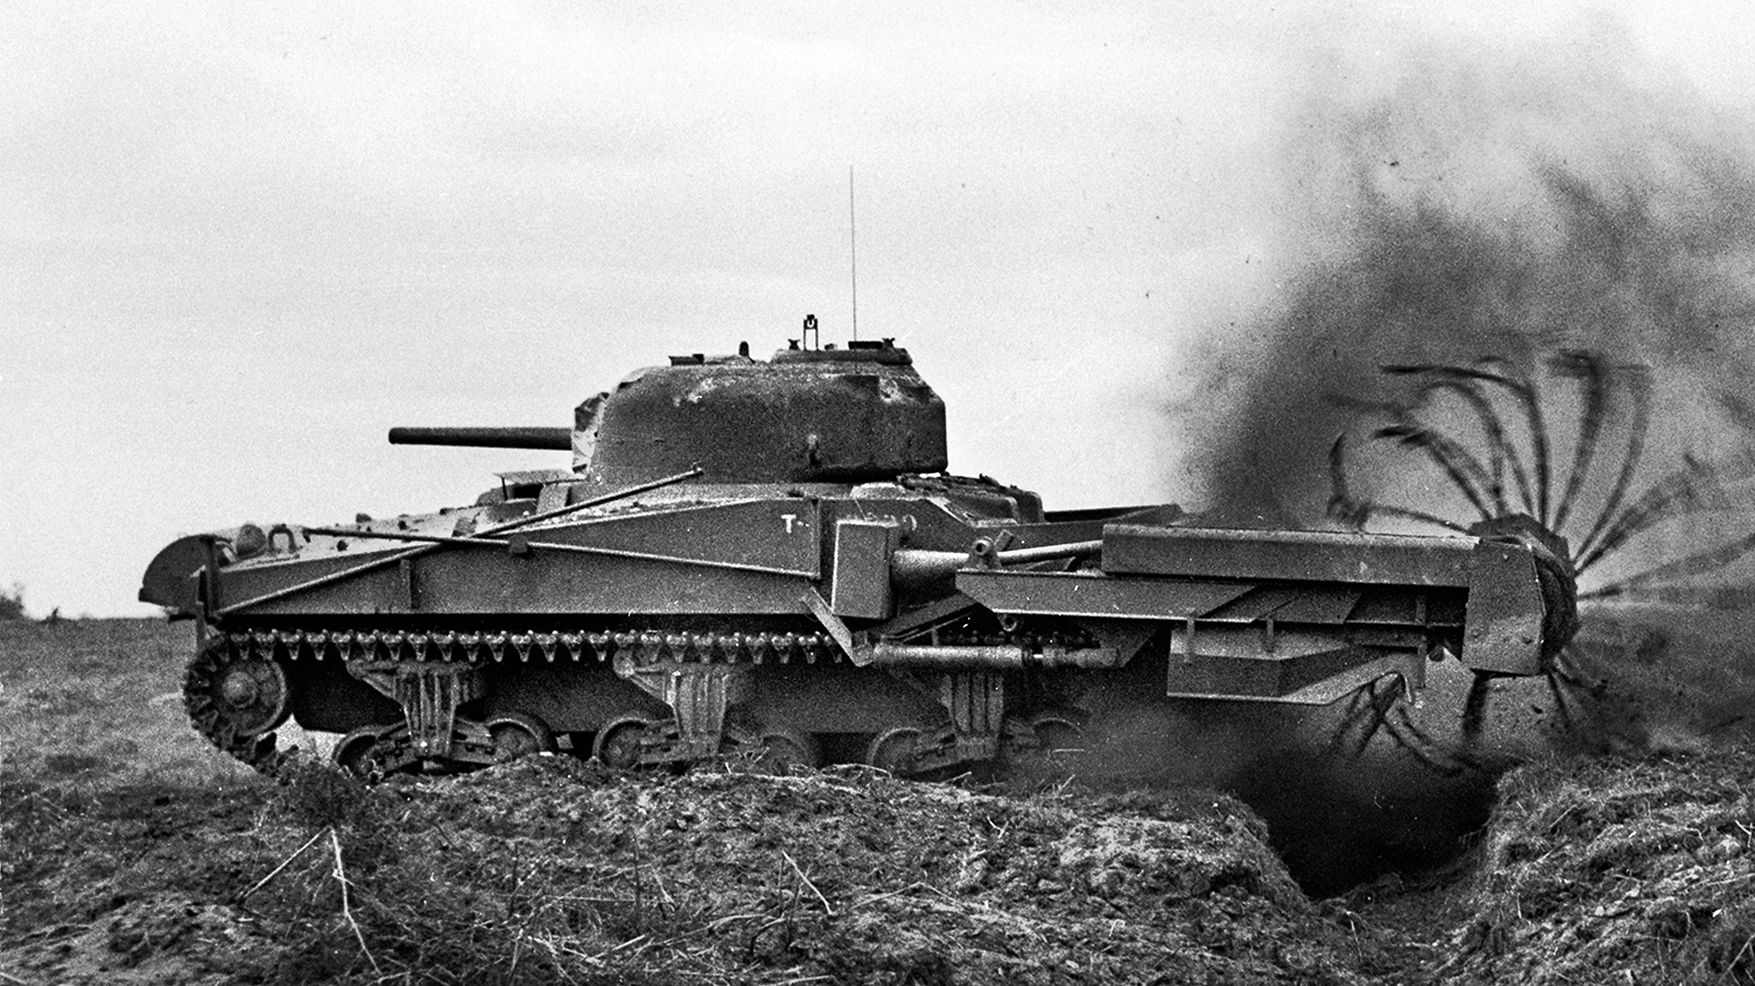 A problem solving engineer, Major General Percy Hobart developed the “Crab” from a Sherman tank with a chain flail attached to detonate mines.  His “Crocodile,” fashioned from a Churchill tank, was 
fitted with a flamethrower and towed a 400-gallon armored fuel tank for it.